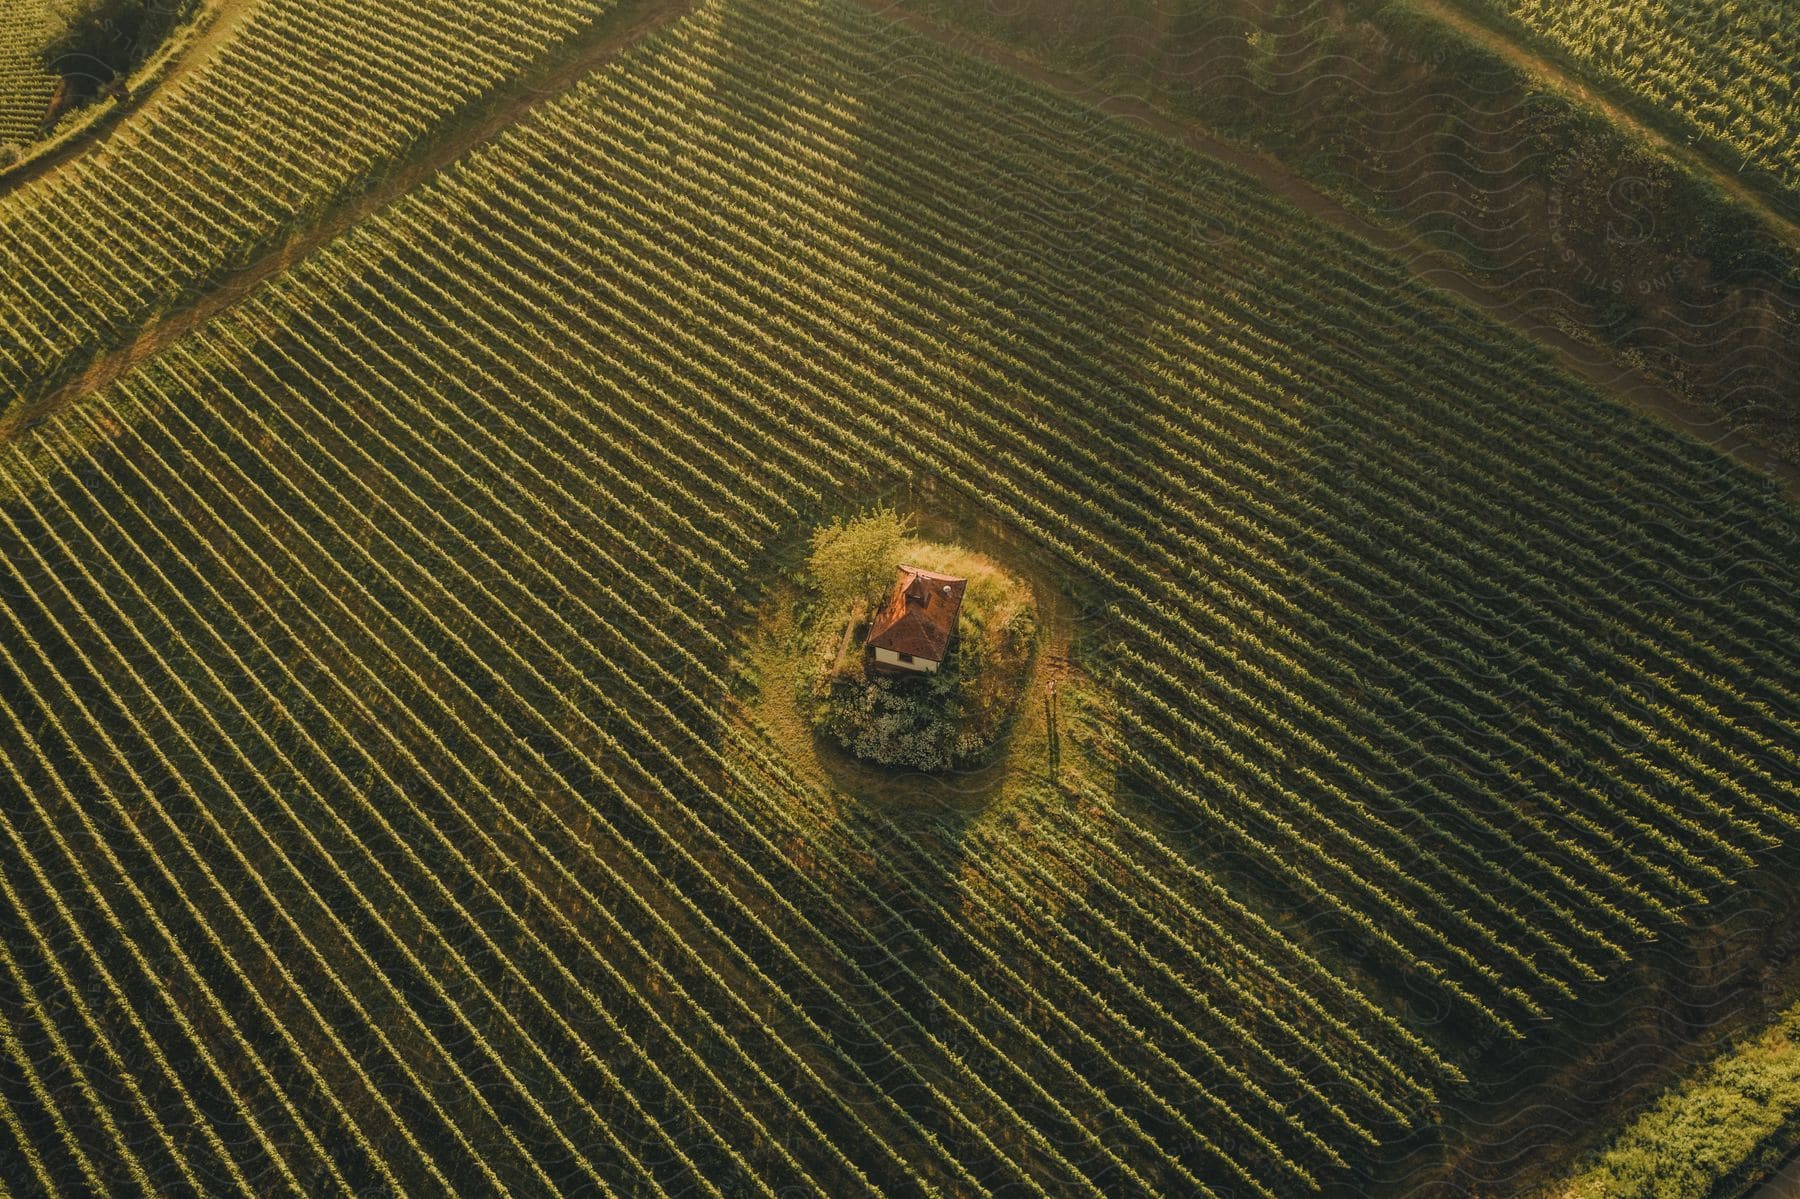 An aerial view of a farmhouse surrounded by a field of crops bathed in sunlight.